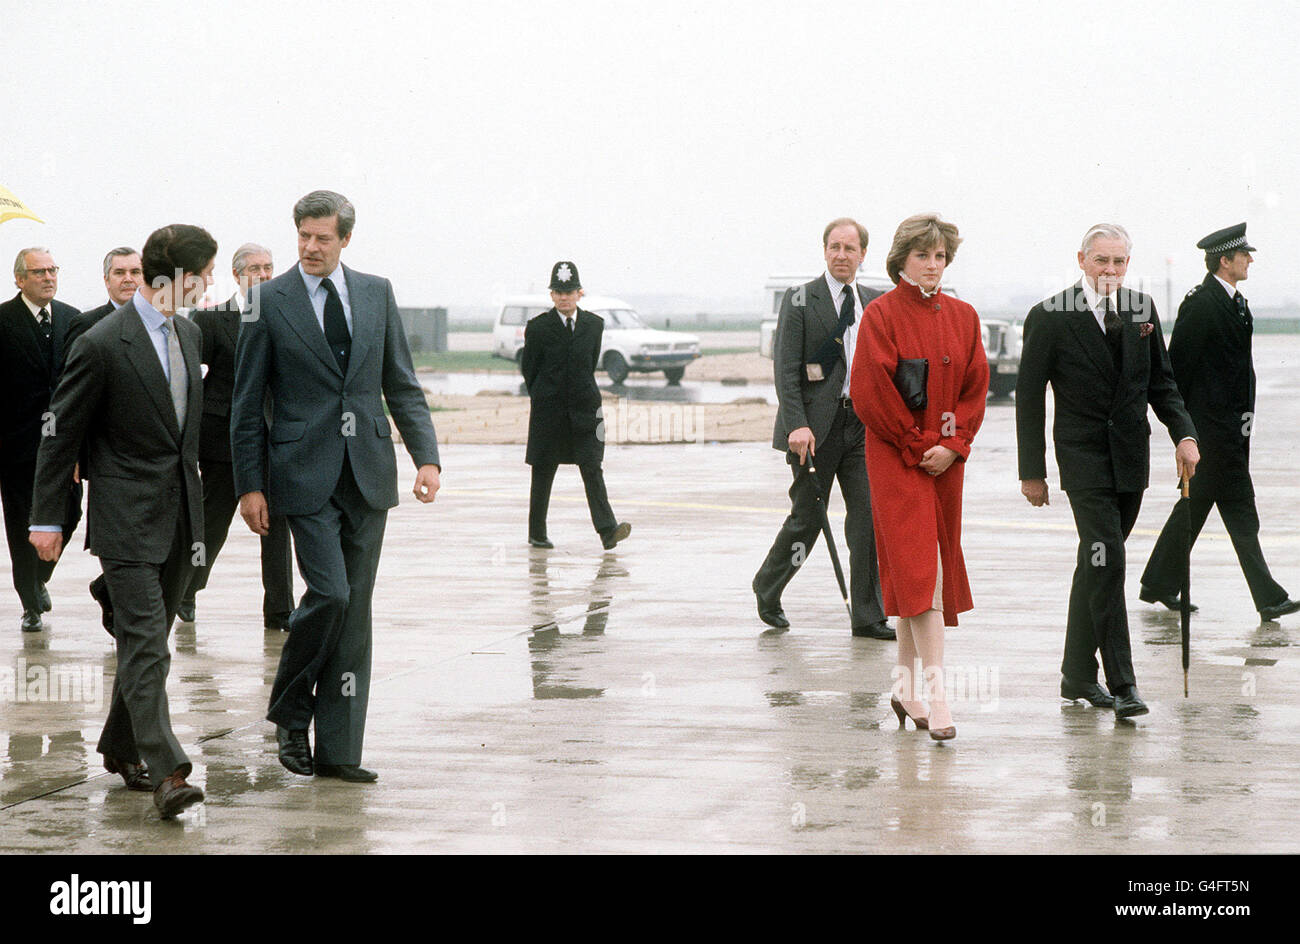 PA NEWS PHOTO MARCH 1981 THE PRINCE AND A THIN LOOKING PRINCESS OF WALES WALK TO HIS AIRCRAFT AT HEATHROW AIRPORT, LONDON AMONG A GROUP OF OFFICALS BEFORE LEAVING THE PRINCESS FOR FIVE WEEKS FOR A TOUR OF NEW ZEALAND, AUSTRALIA AND VENEZUELA Stock Photo